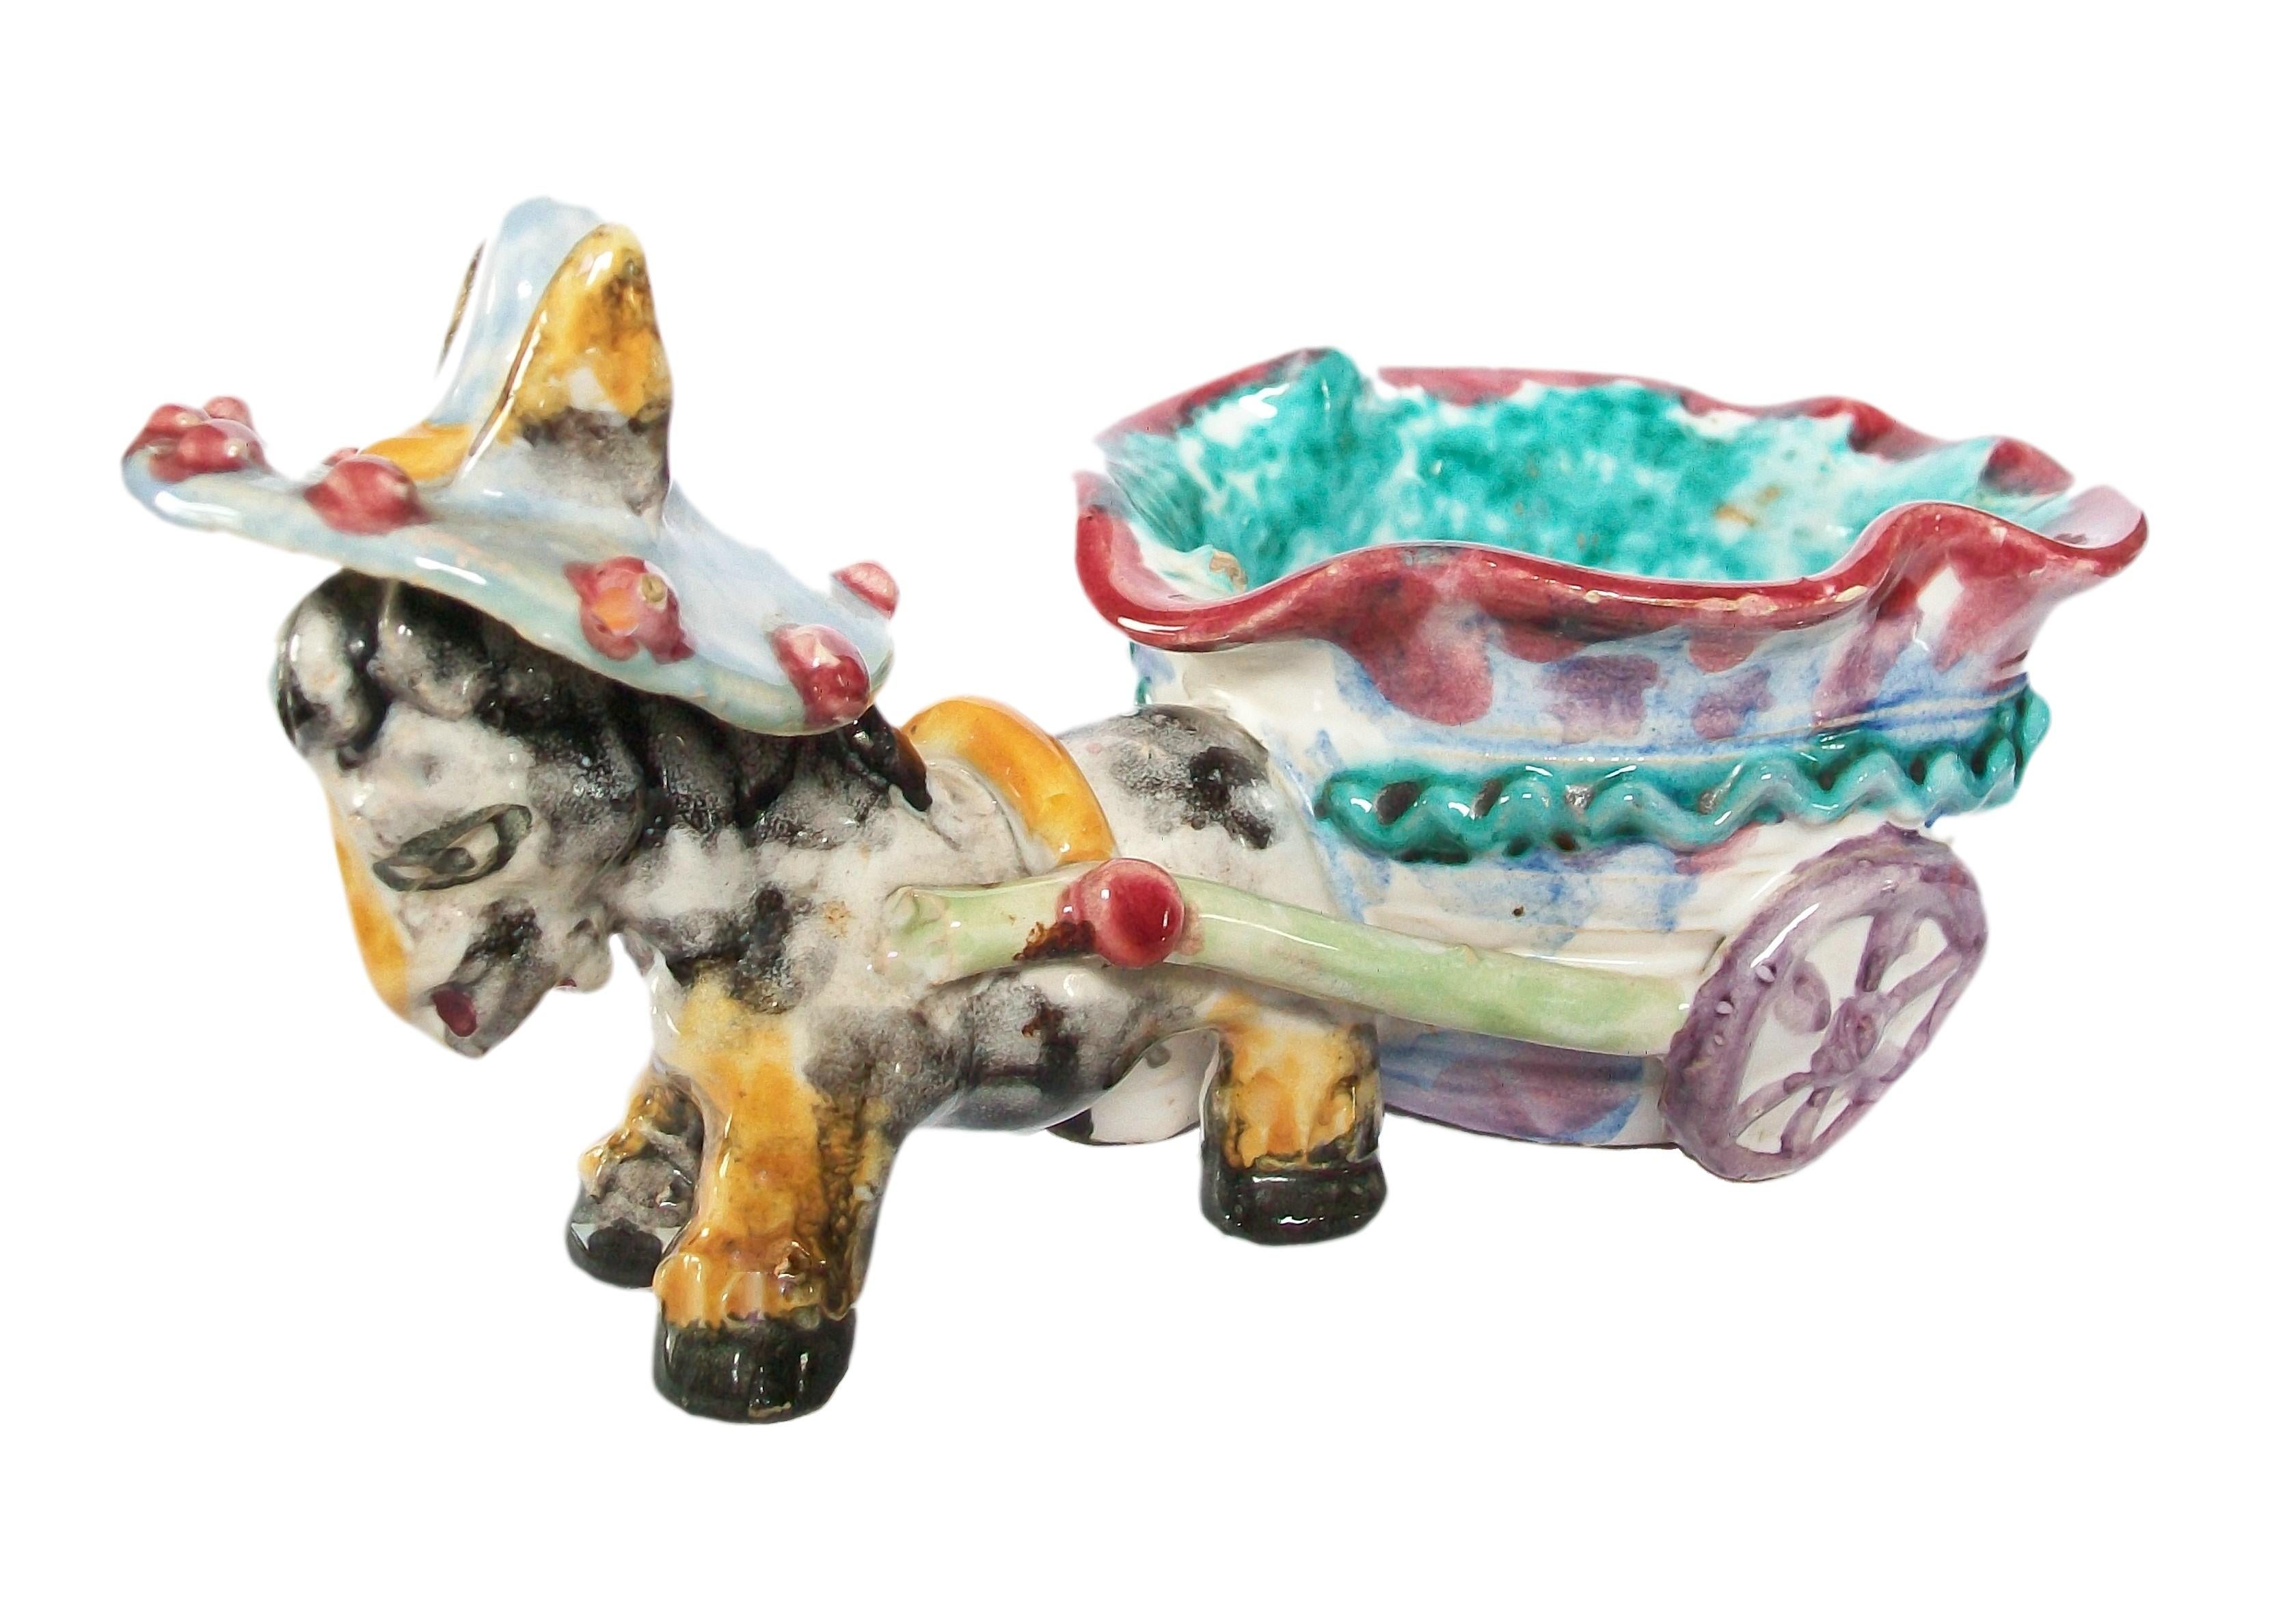 Mid Century studio pottery donkey and cart figure / bowl - hand modelled and painted with vibrant multi-color glazes over a cream base - signed & numbered on the base (unknown / unidentified potter / studio) - Italy - circa 1960's.

Excellent